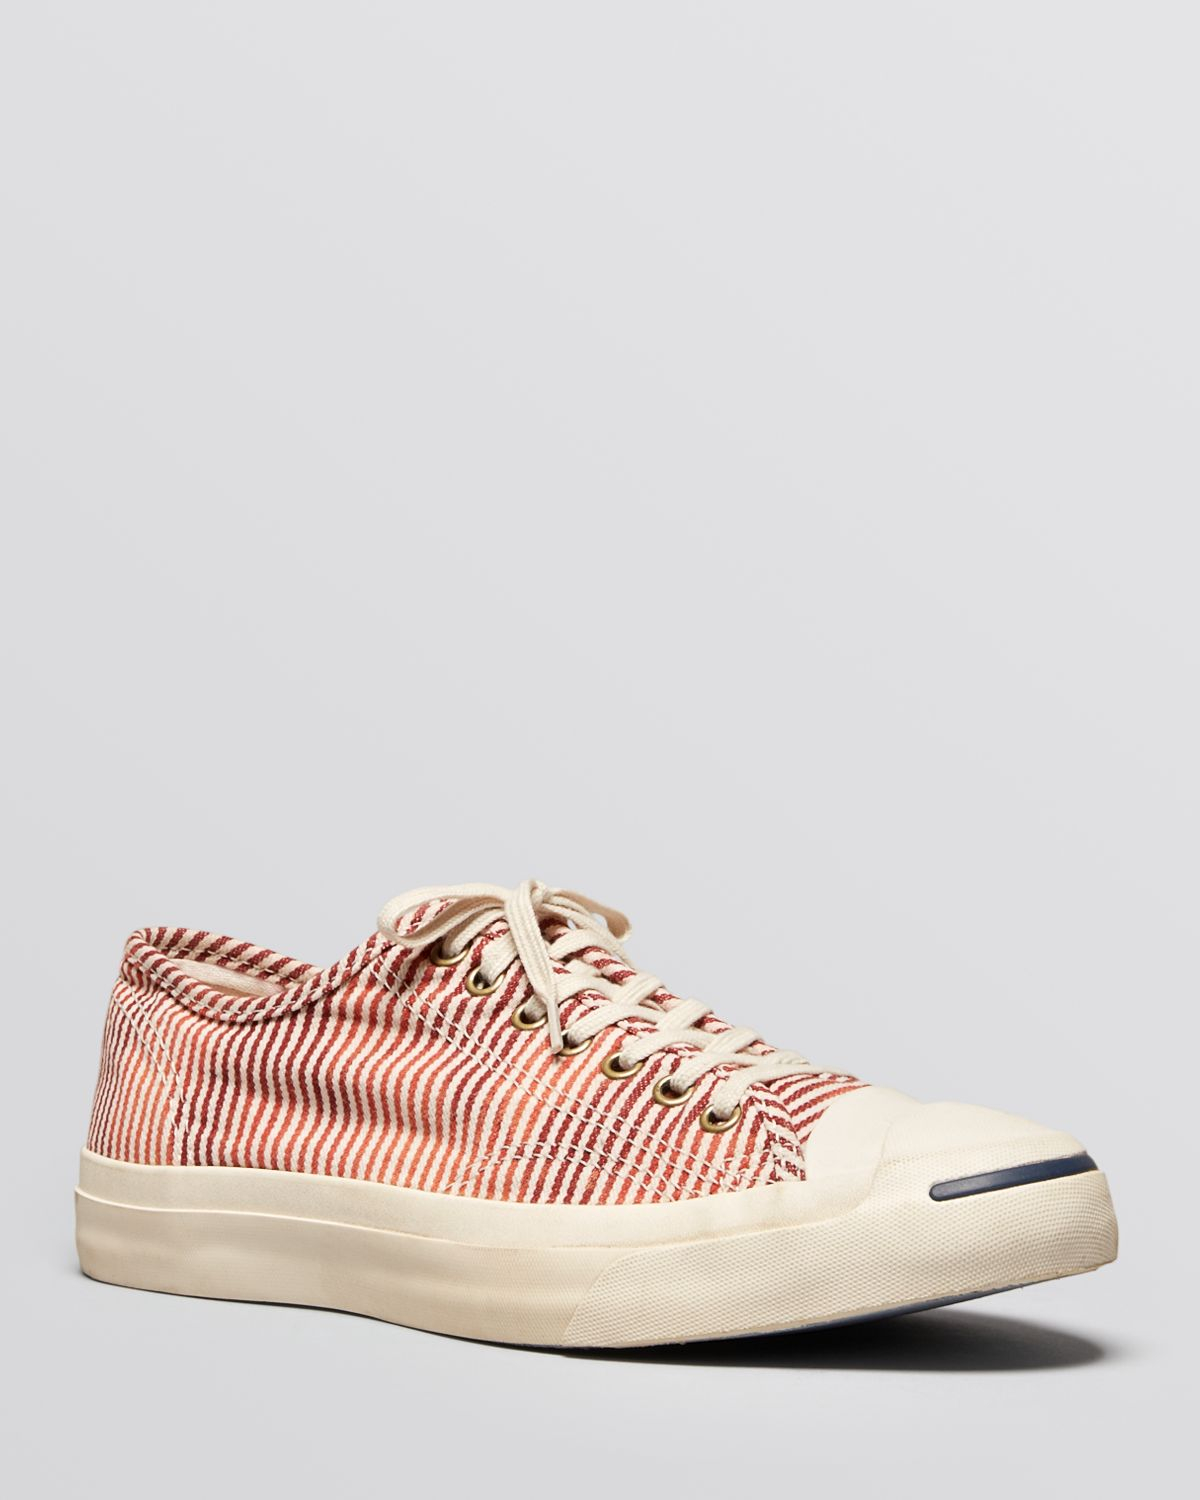 Converse Jack Purcell Jack Sneakers in Pink for Men - Lyst